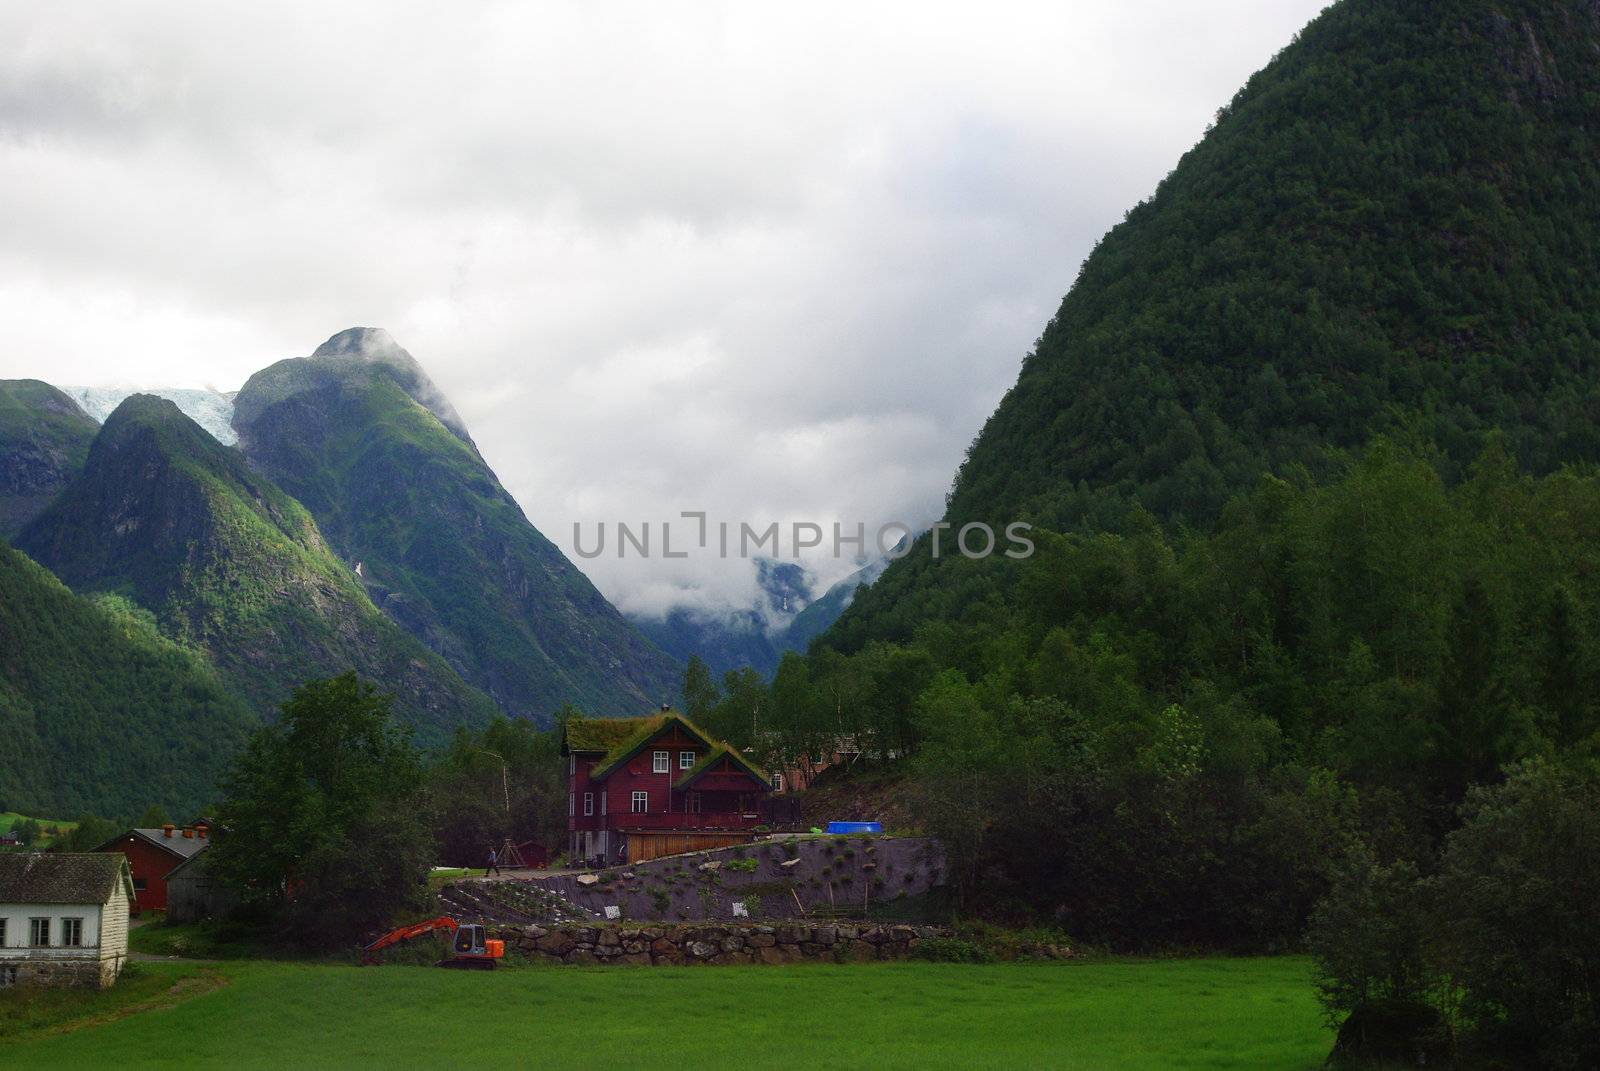 Traditional wooden houses on hillside background in Invik, Norway